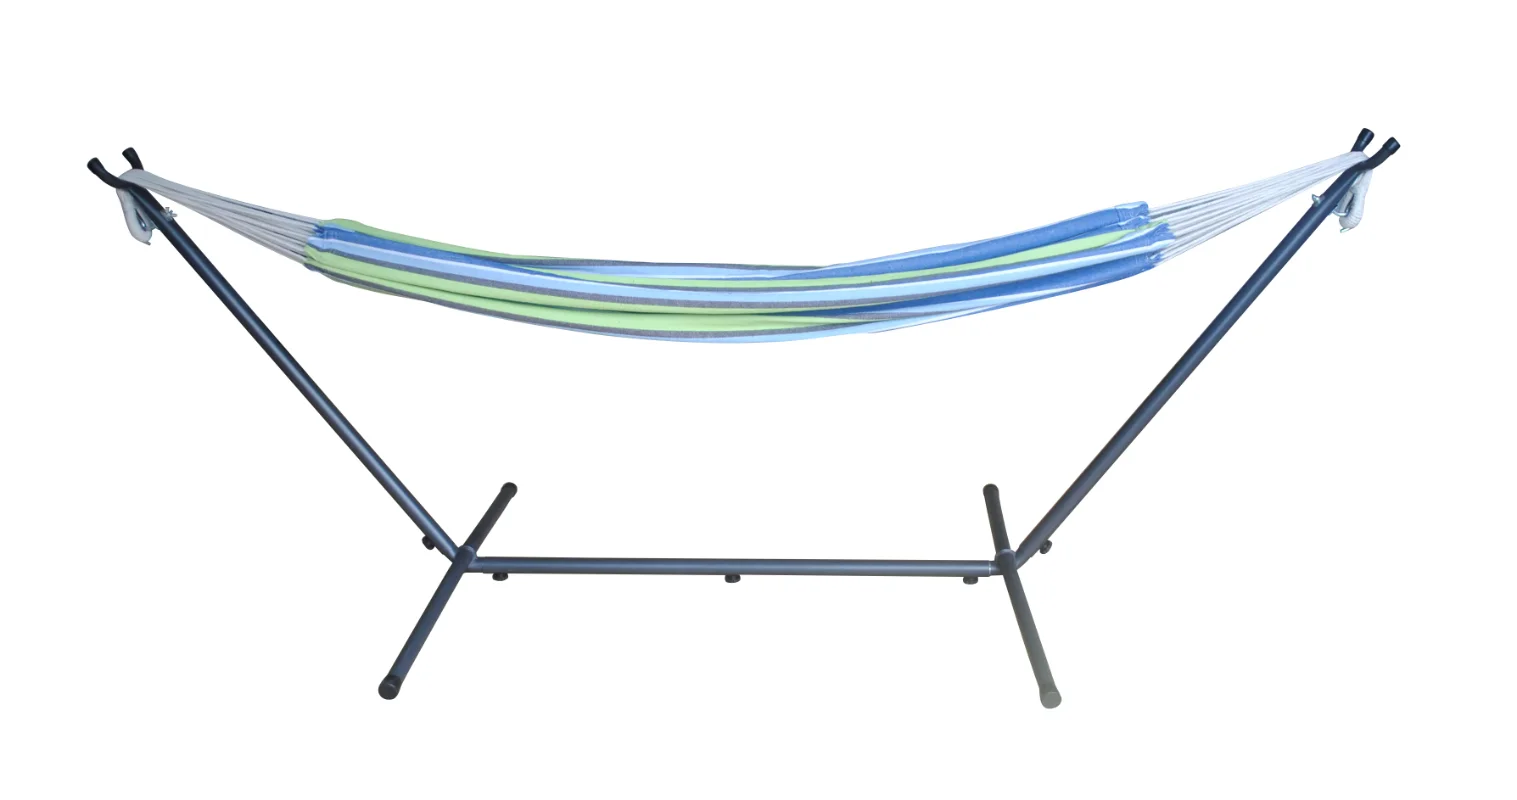 

Mainstays Blue Striped Hammock with Metal Stand, Portable Carrying Case, Blue Color